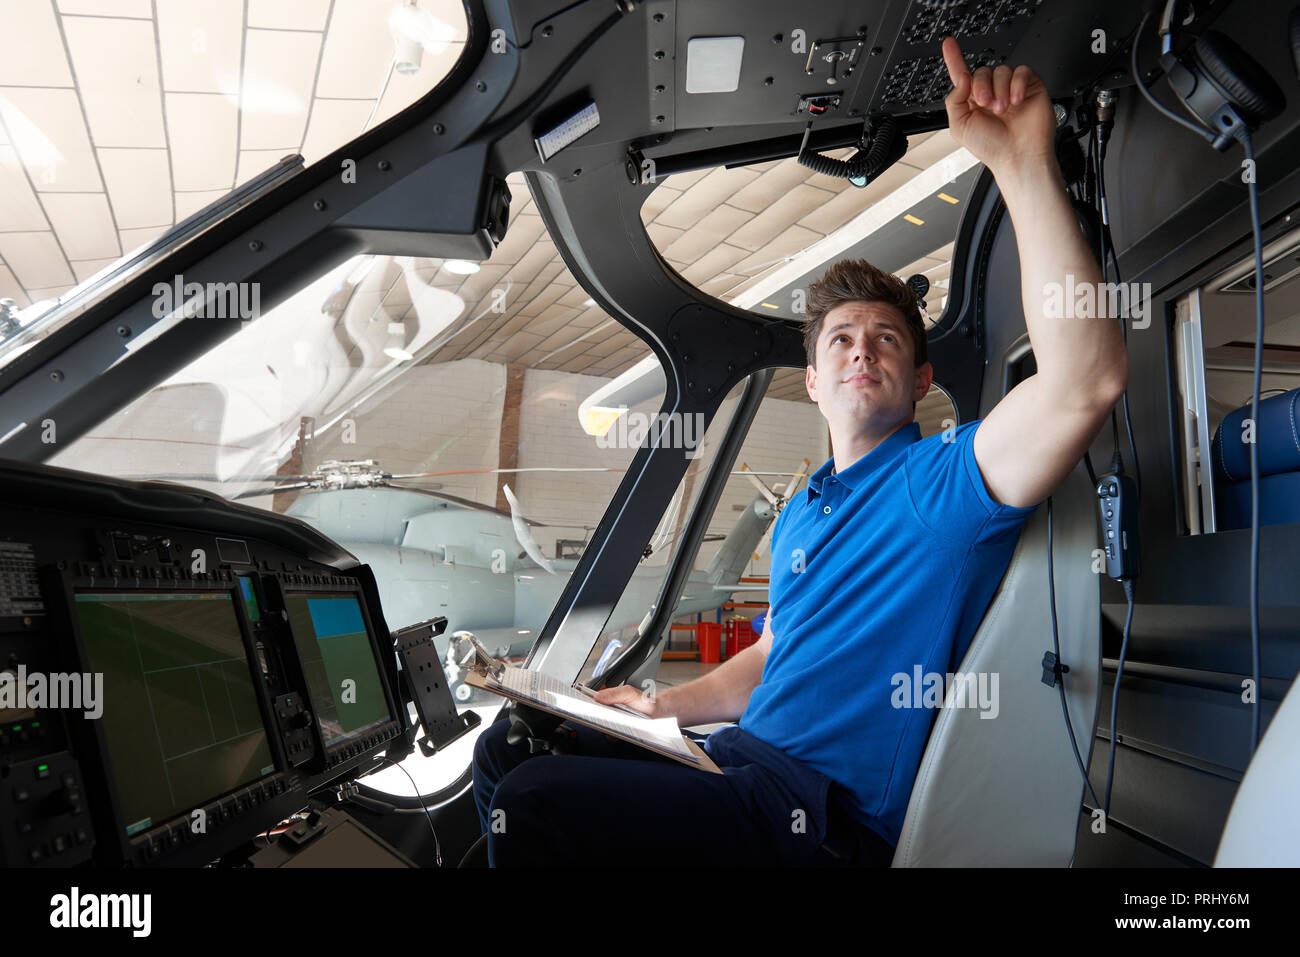 Male Aero Engineer With Clipboard Working In Helicopter Cockpit Stock Photo